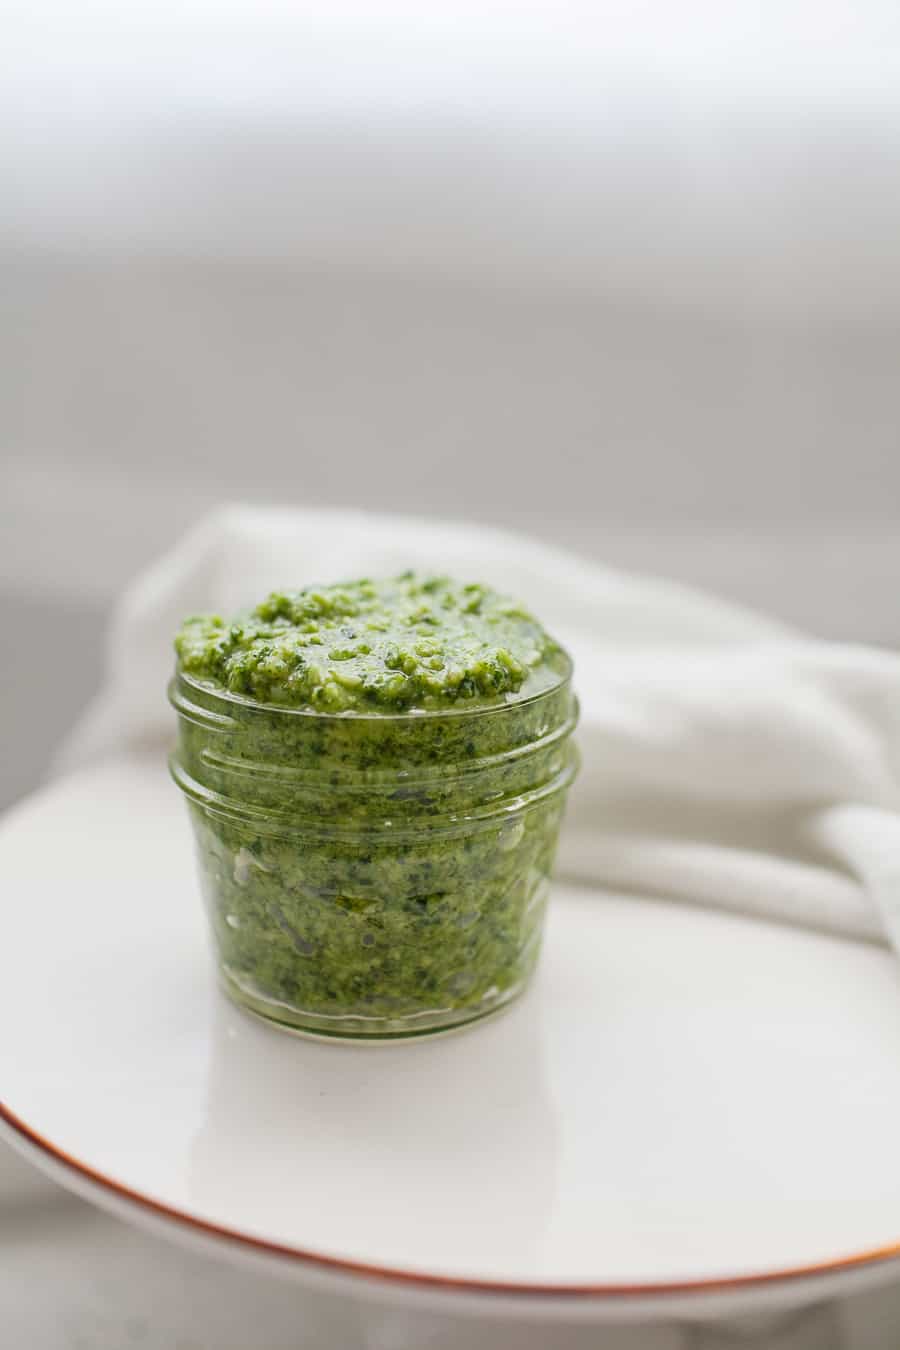 If you're a pesto fan, you're going to fall even more in love with pesto once you realize how easy it is to make it homemade! This homemade kale arugula pesto variation is a perfect peppery, smooth blend of pesto that you'll choose every time. Make this kale arugula pesto ASAP! homemade pesto | arugula pesto | kale pesto | kale arugula pesto | homemade italian sauces | homemade pasta sauce | pasta sauce recipes